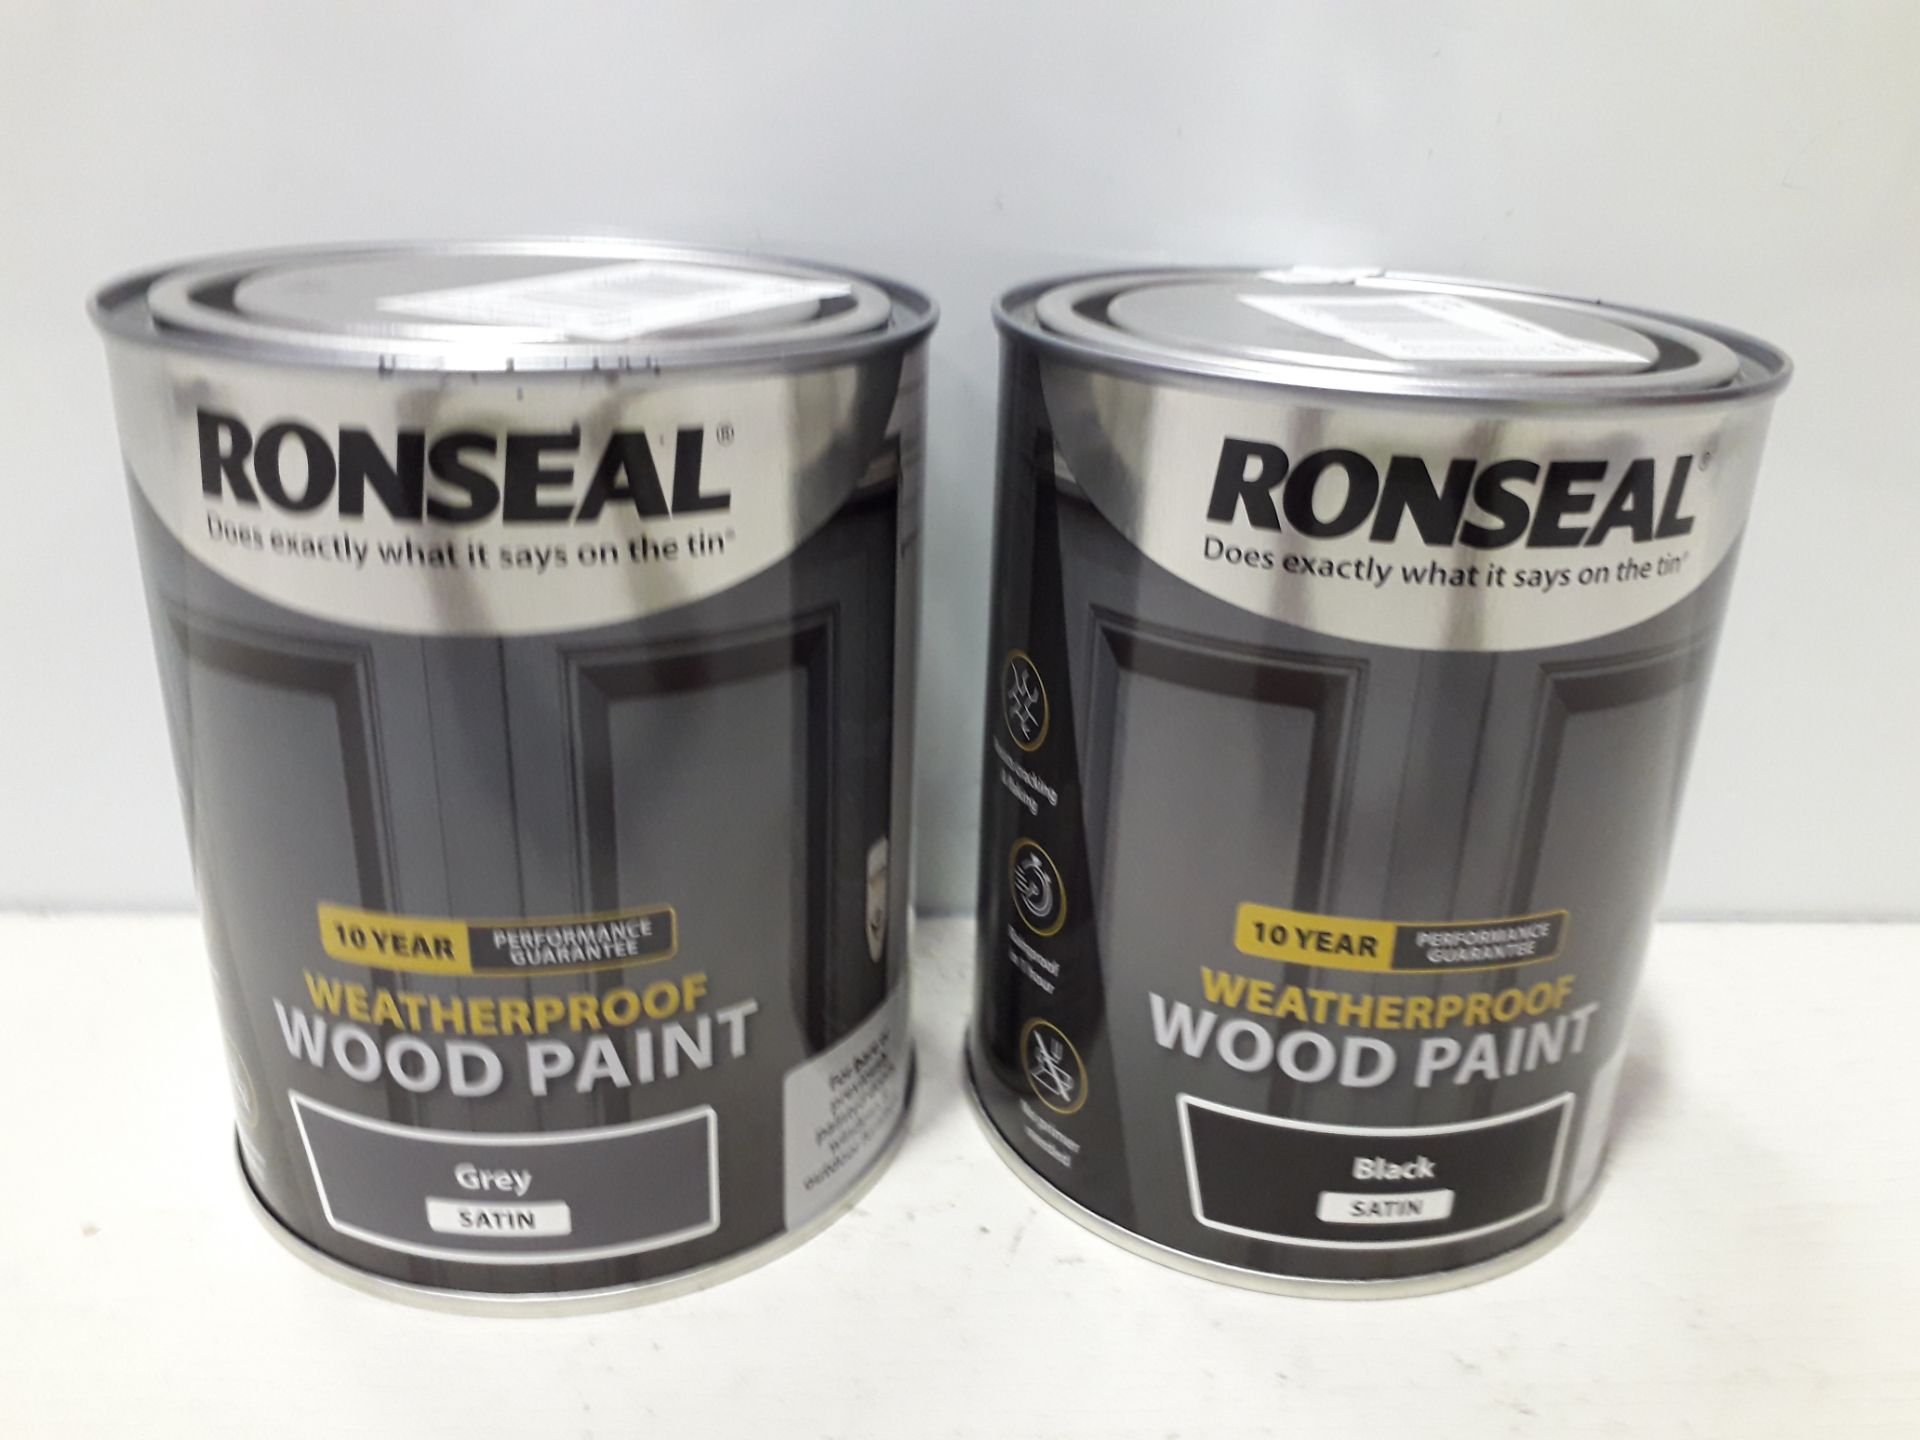 30 X BRAND NEW RONSEAL WEATHERPROOF WOOD PAINT ( IN SATIN GREY AND SATIN BLACK ) FOR DOORS WINDOWS